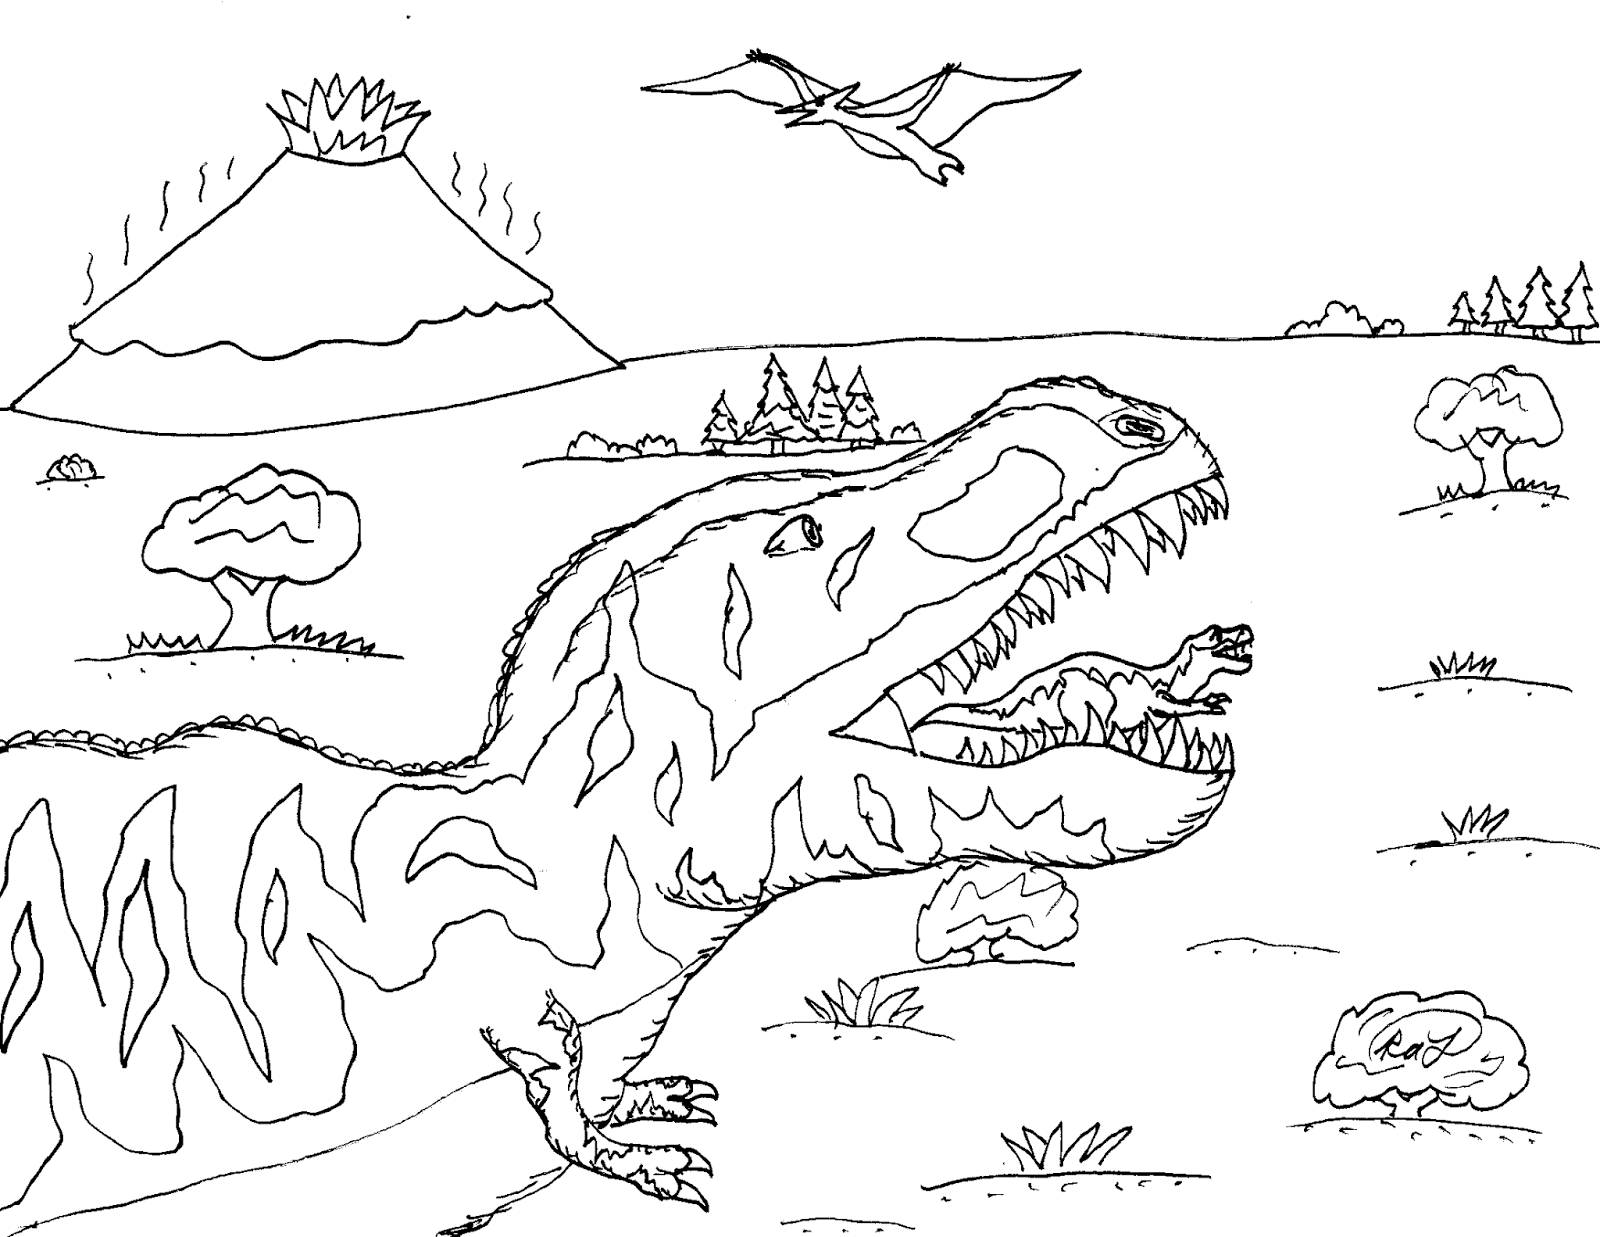 Robin's Great Coloring Pages: T. rex Mommy